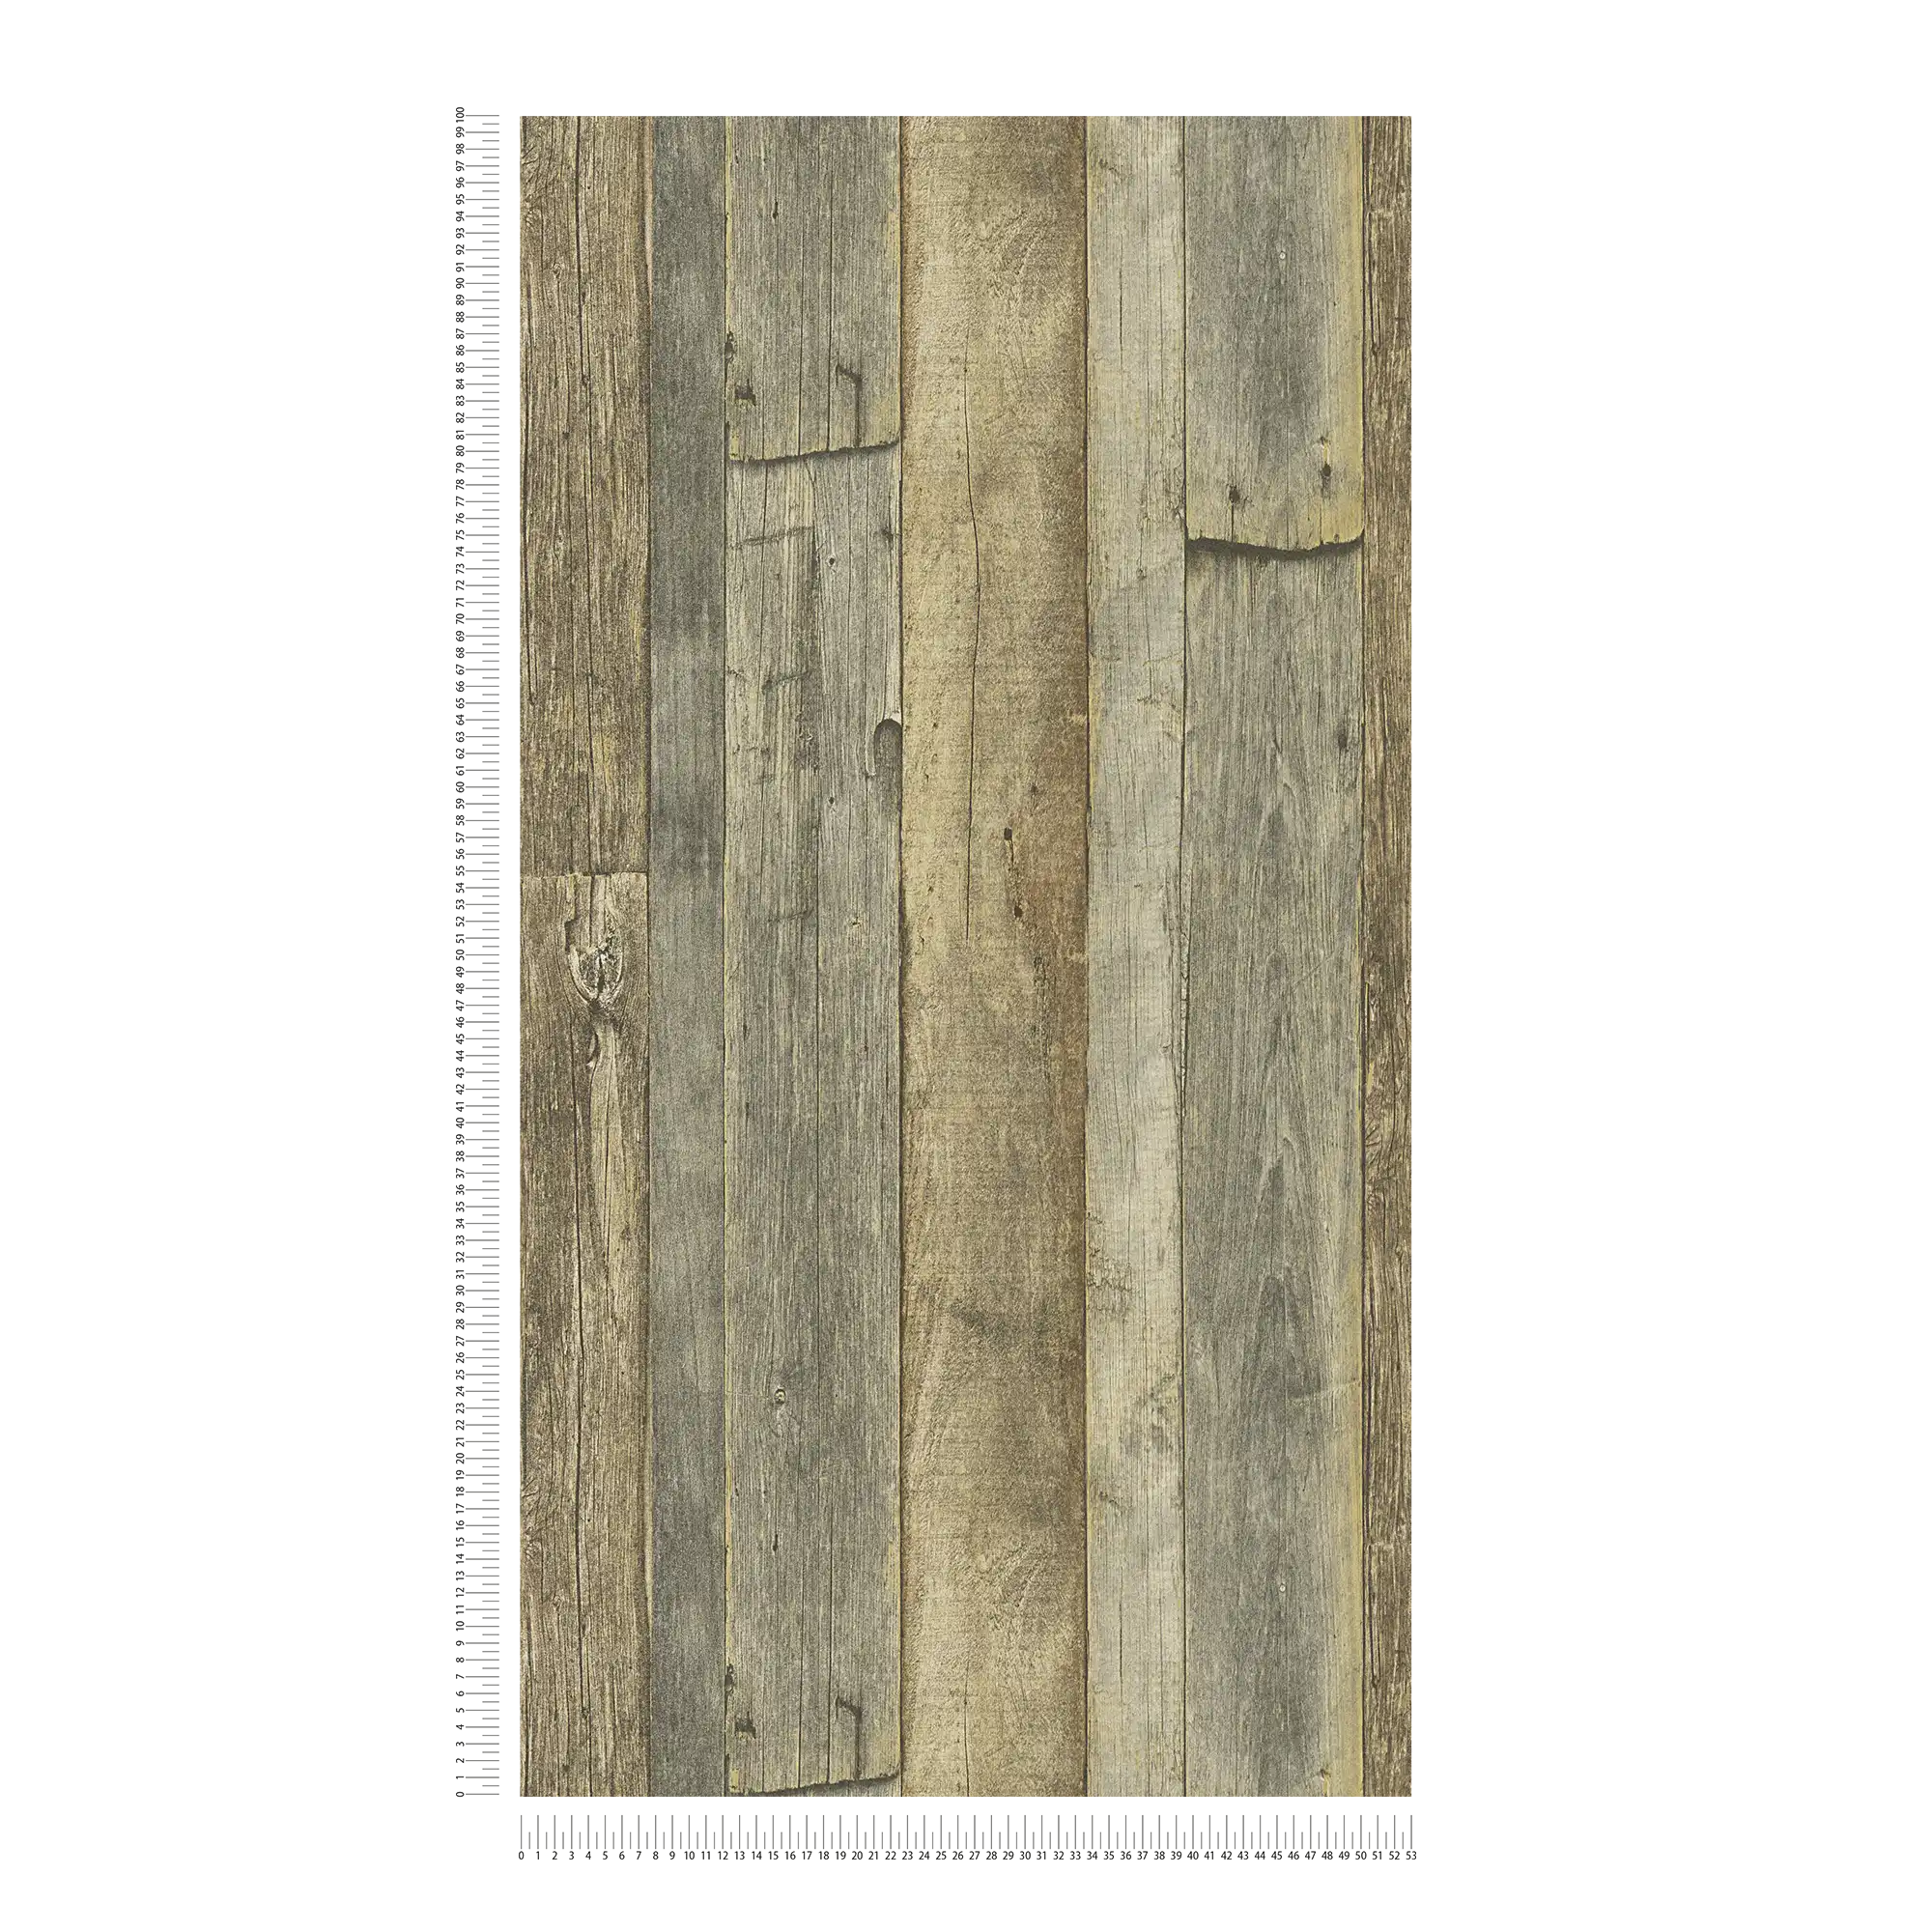             Wallpaper with wood look in rustic country style - brown, yellow, cream
        